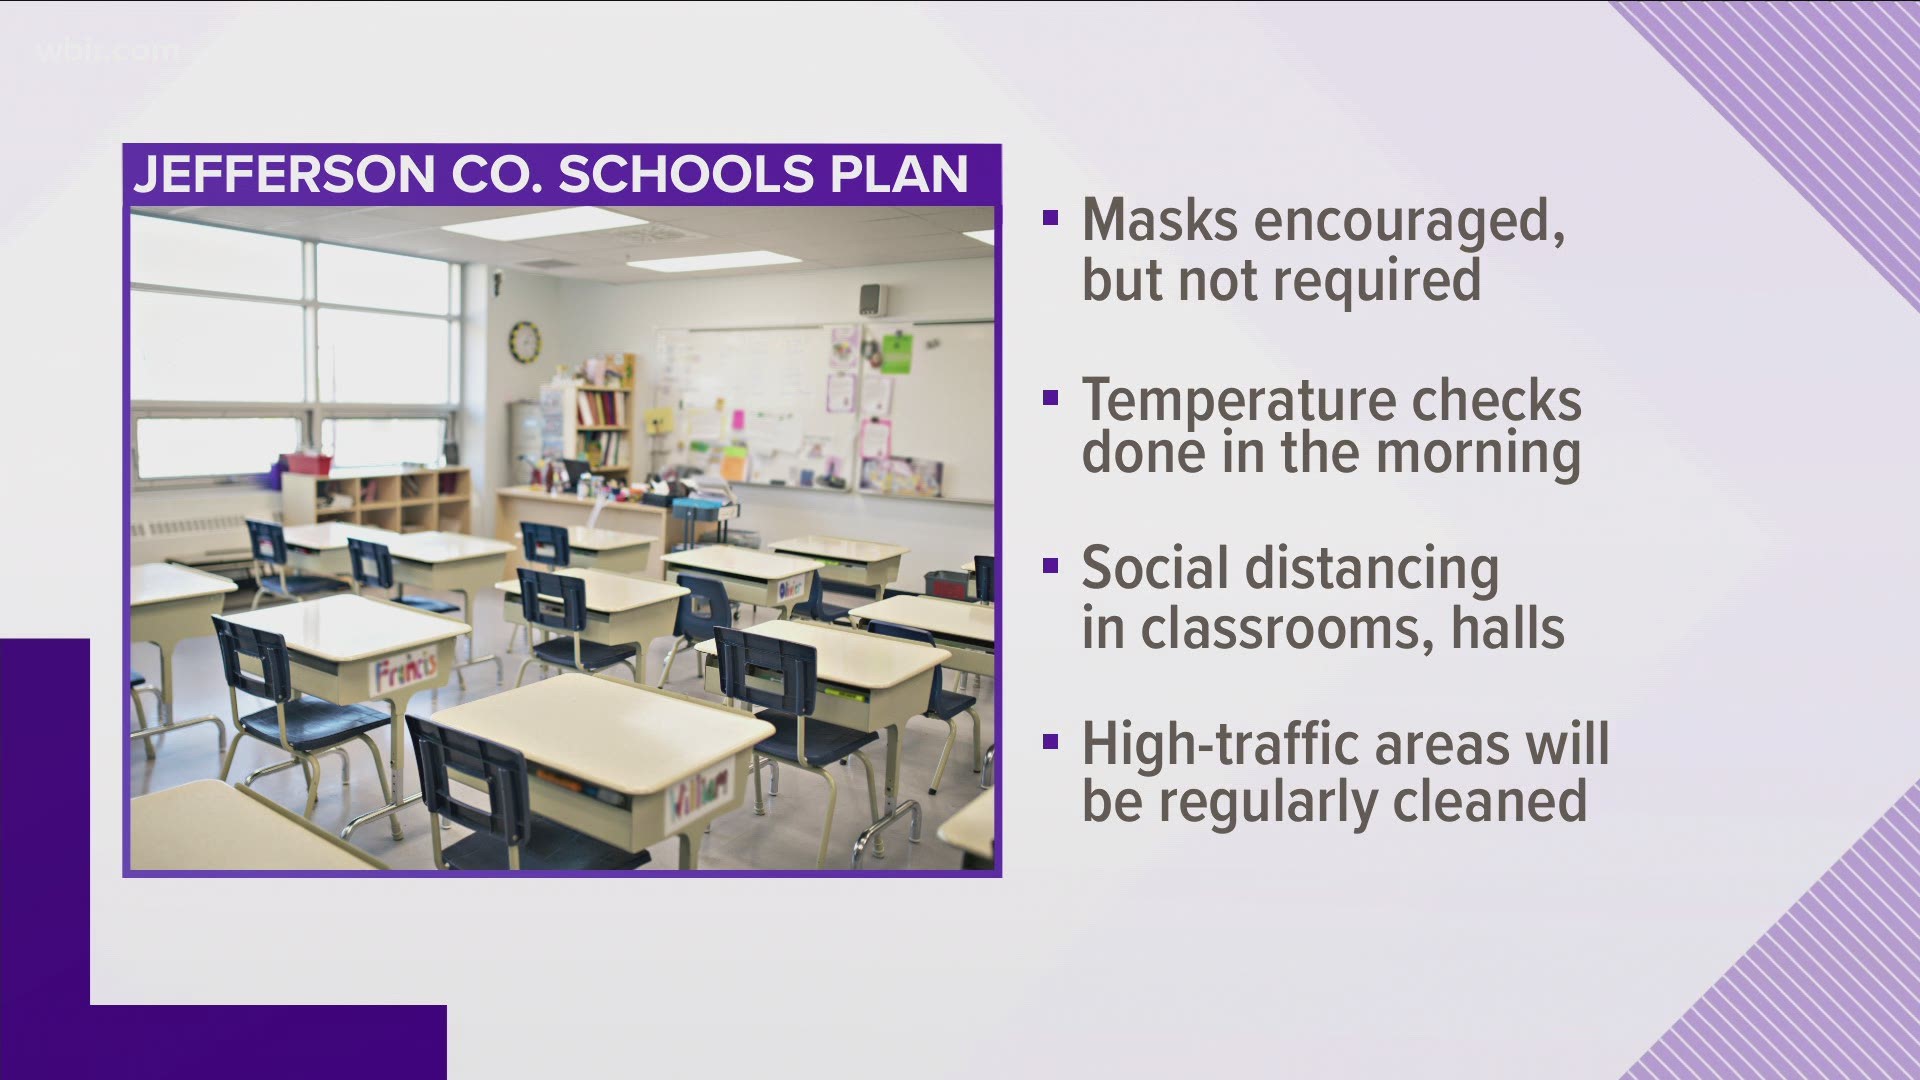 Jefferson County released its COVID-19 safety plan for the upcoming school year. Social distancing will be encouraged in classrooms, offices and playgrounds.